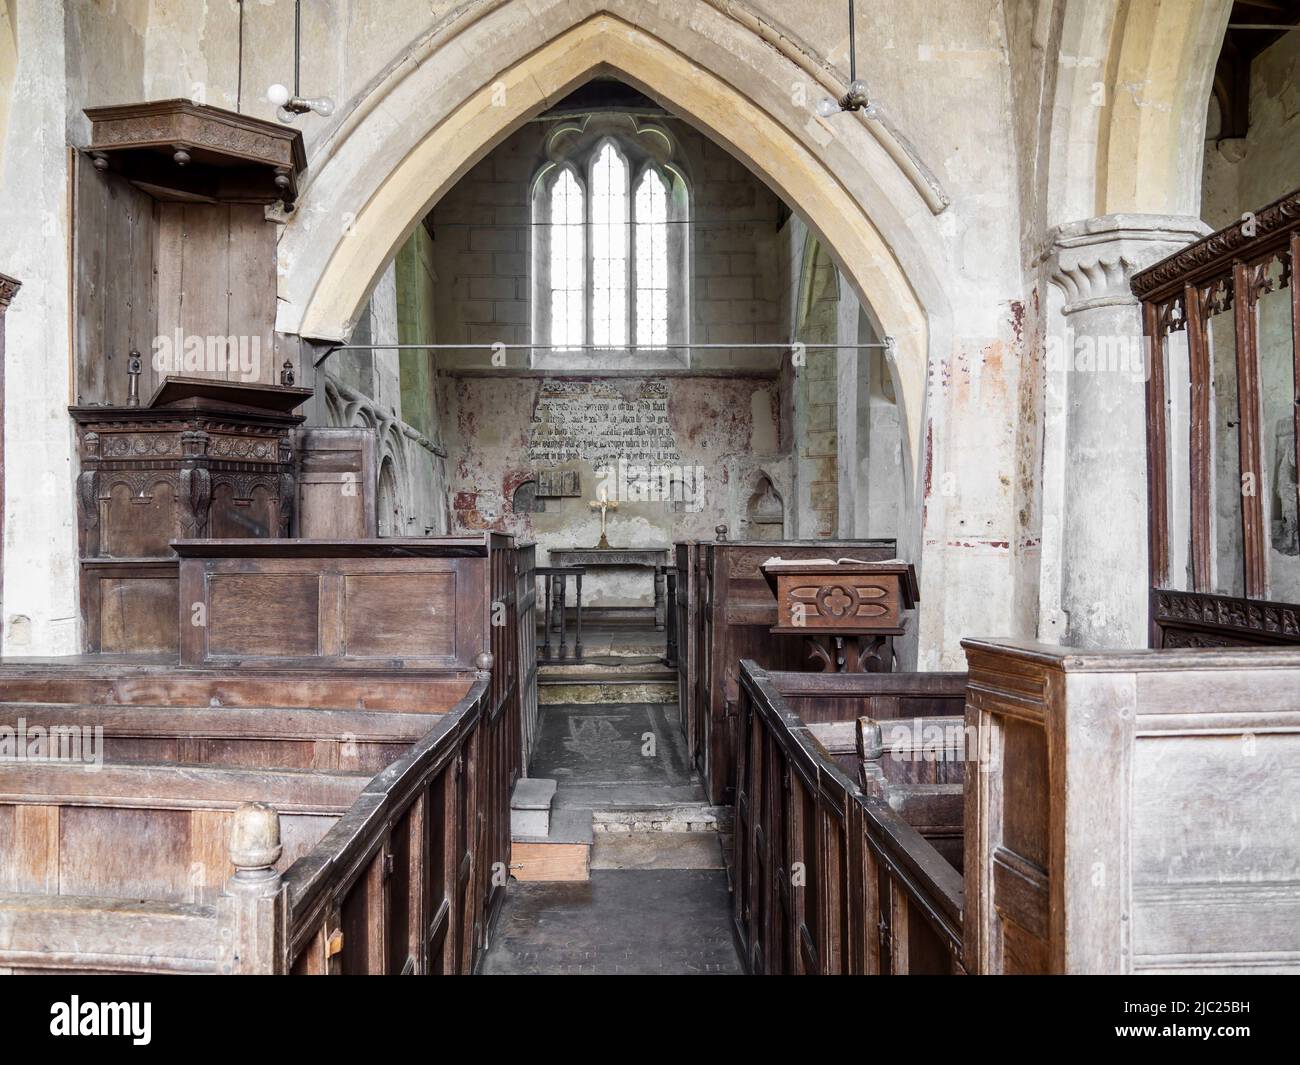 Interior shot of St. John The Baptist church at Inglesham, Wiltshire, an ancient unmodernised small church near the River Thames at Lechlade. Stock Photo